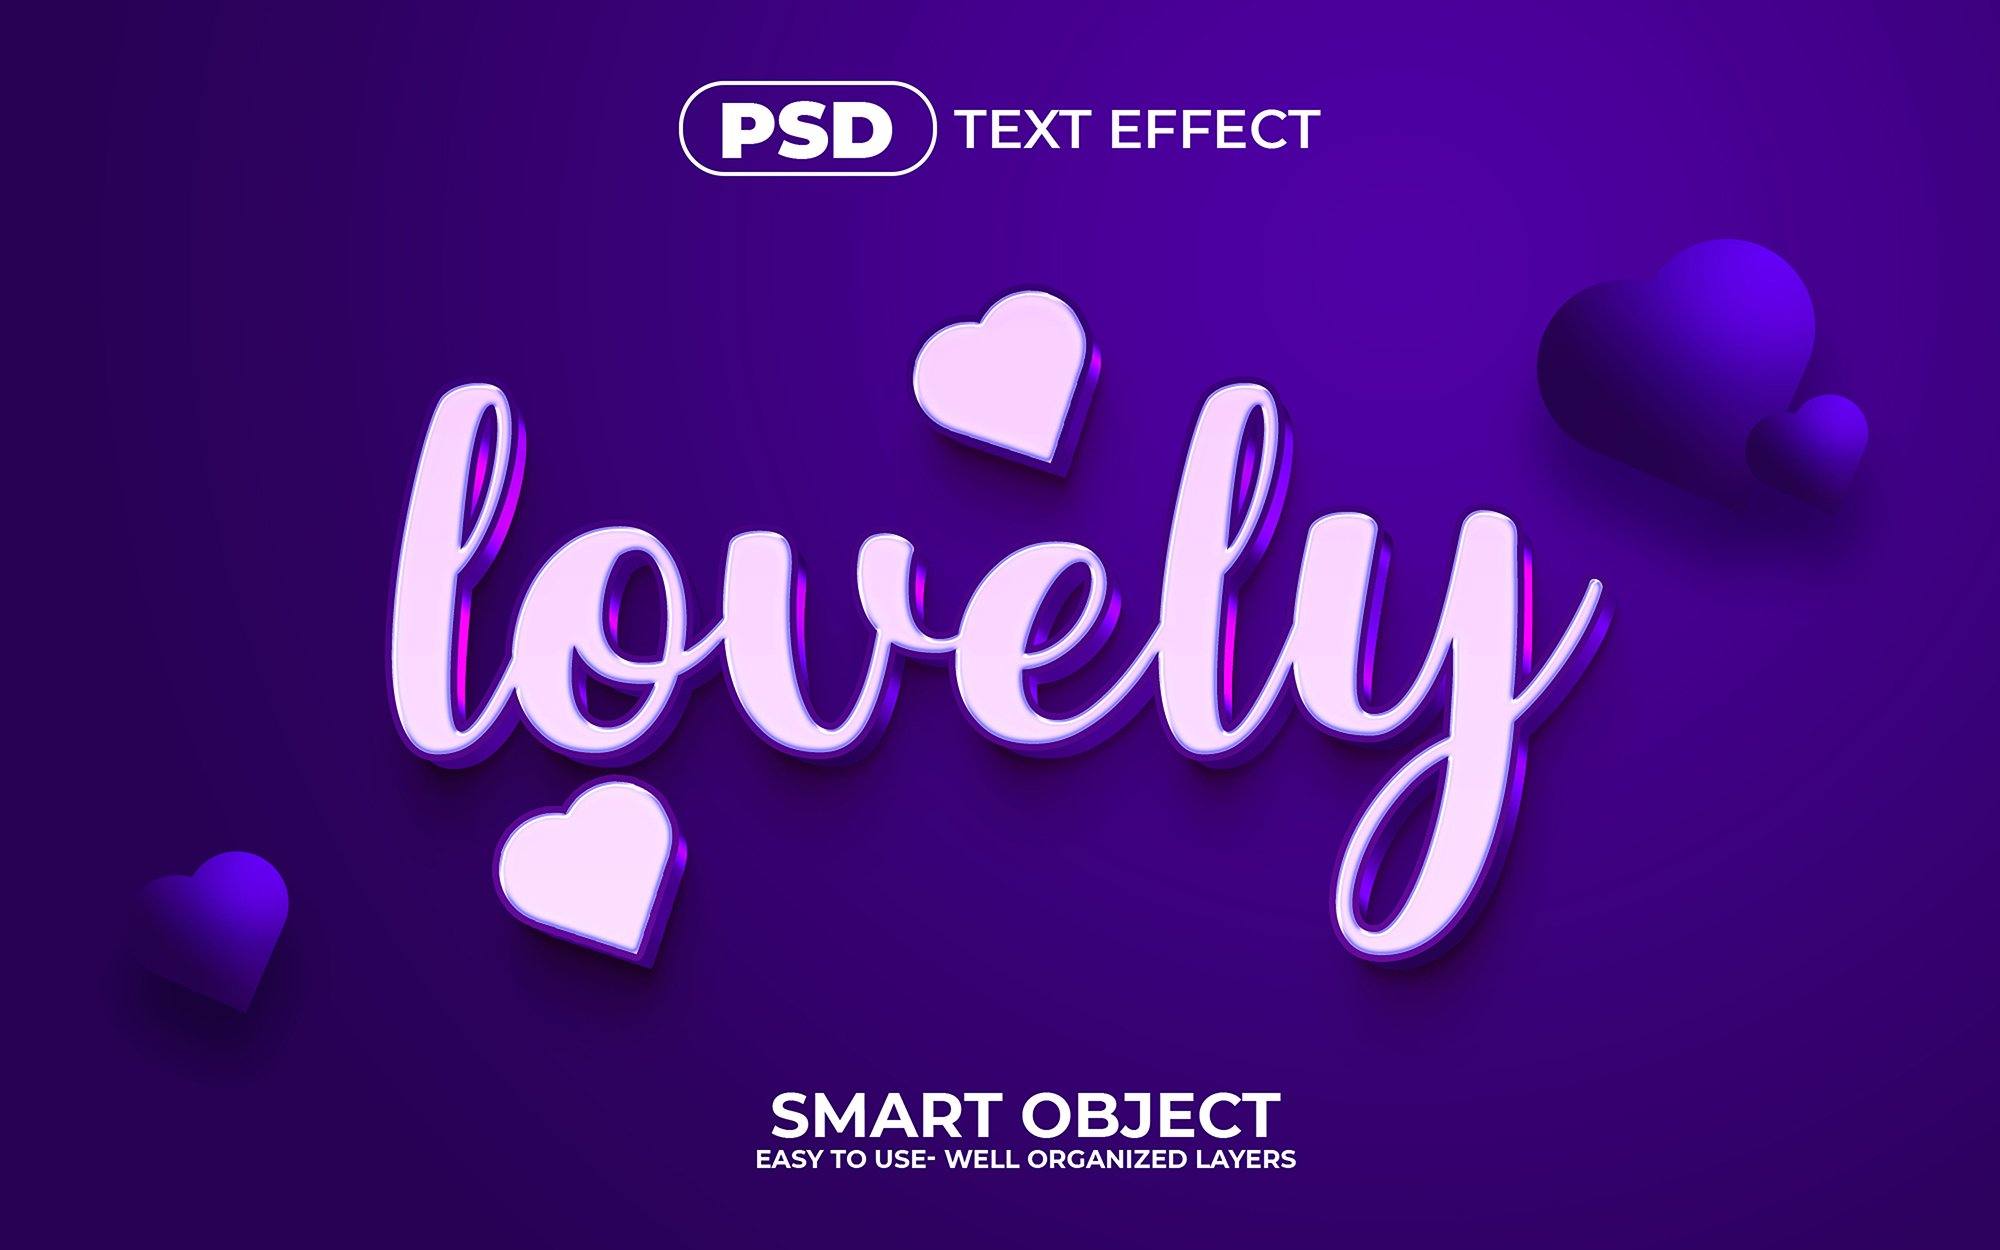 Lovely 3d Editable Text Effect Stylecover image.